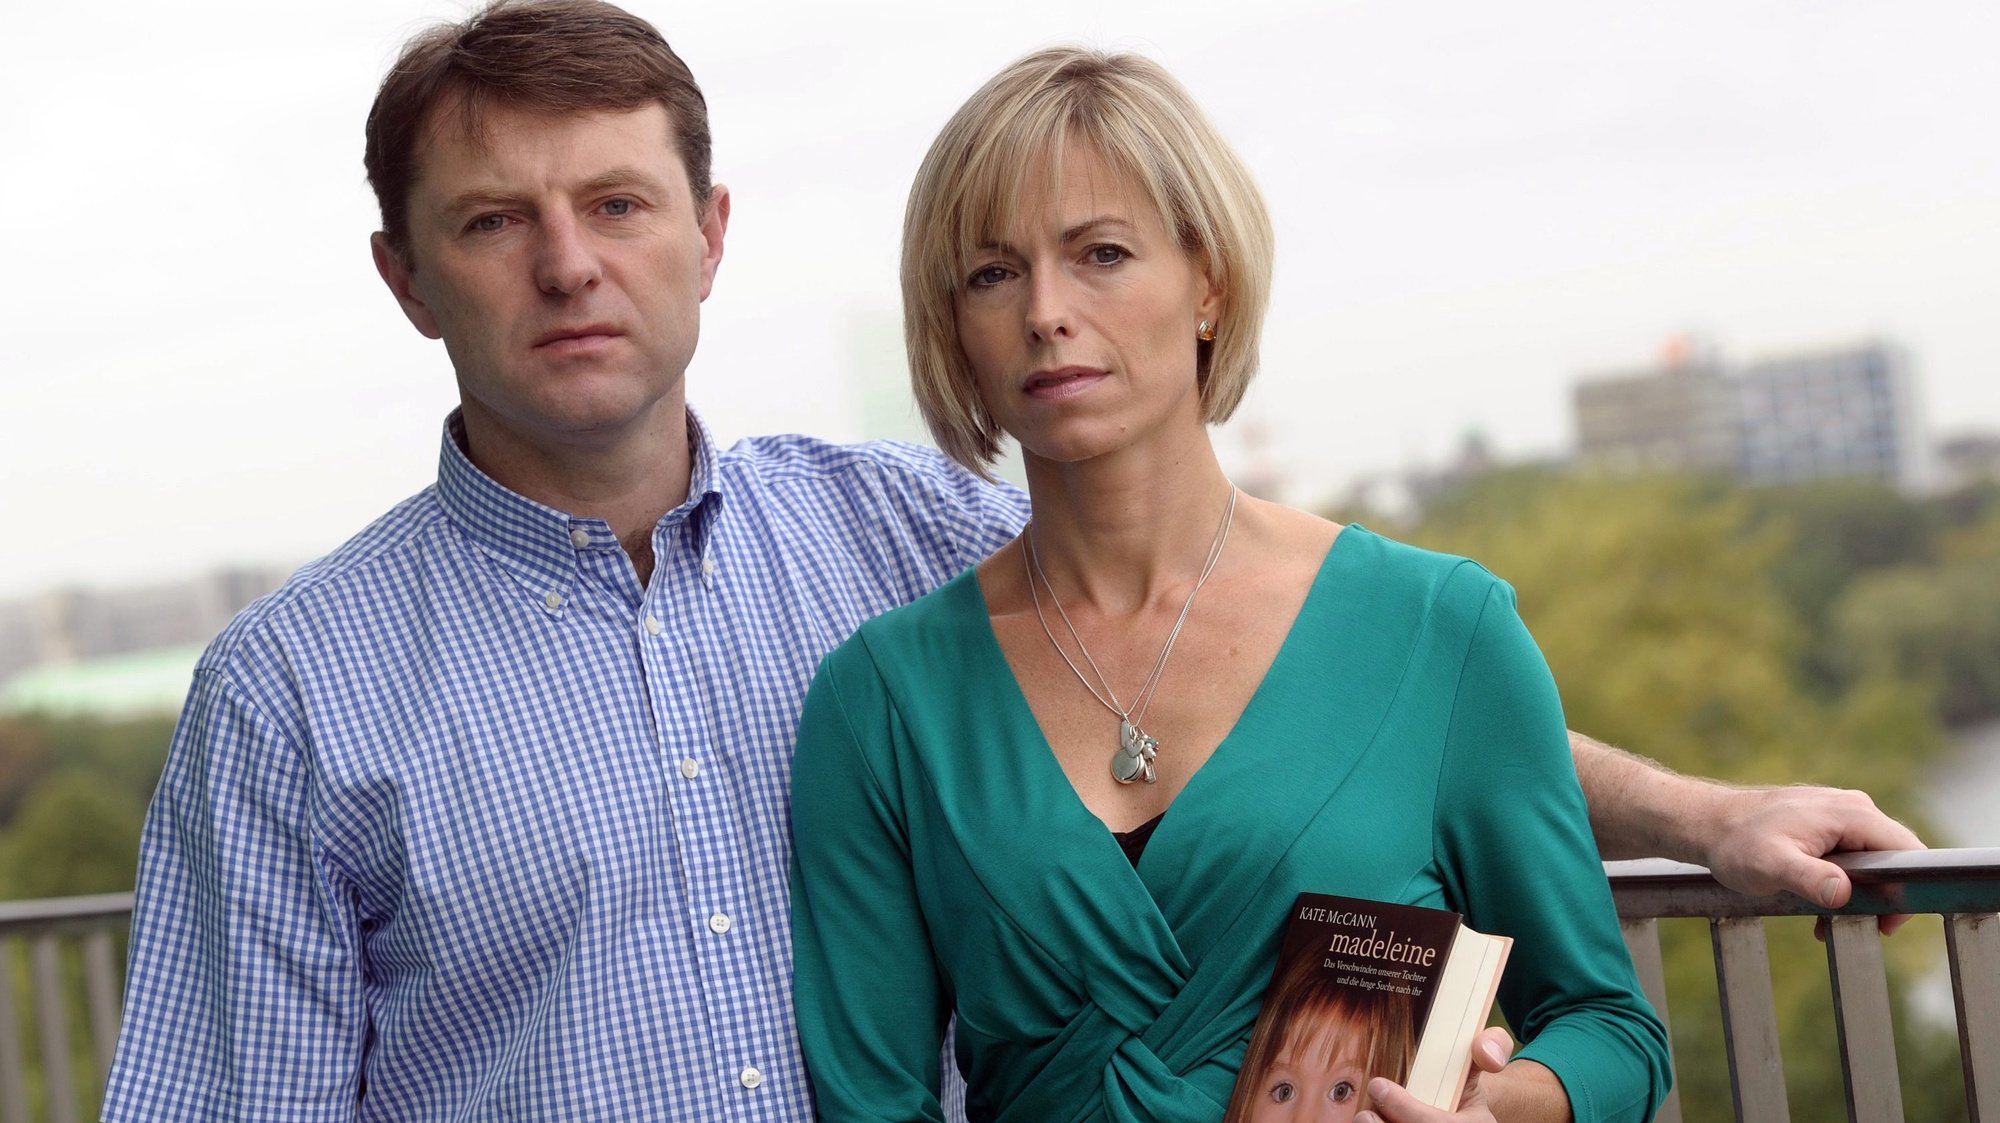 epa02919097 The parents of the missing British girl Maddie, Kate and Gerry McCann, present their new book on a hotel balcony in Hamburg, Germany, 16 September 2011. Maddie, Madeleine McCann disappeared four years ago without a trace from the family&#039;s hotel room in Portugal. In an extraordinary campaign, the parents tried to find her, but without results. Now they speak about their time of suffering, their hopes and throwbacks in their book &#039;Madeleine. Our daughters disappearance and the continuing search for her&#039; by Kate McCann.  EPA/CHRISTIAN CHARISIUS